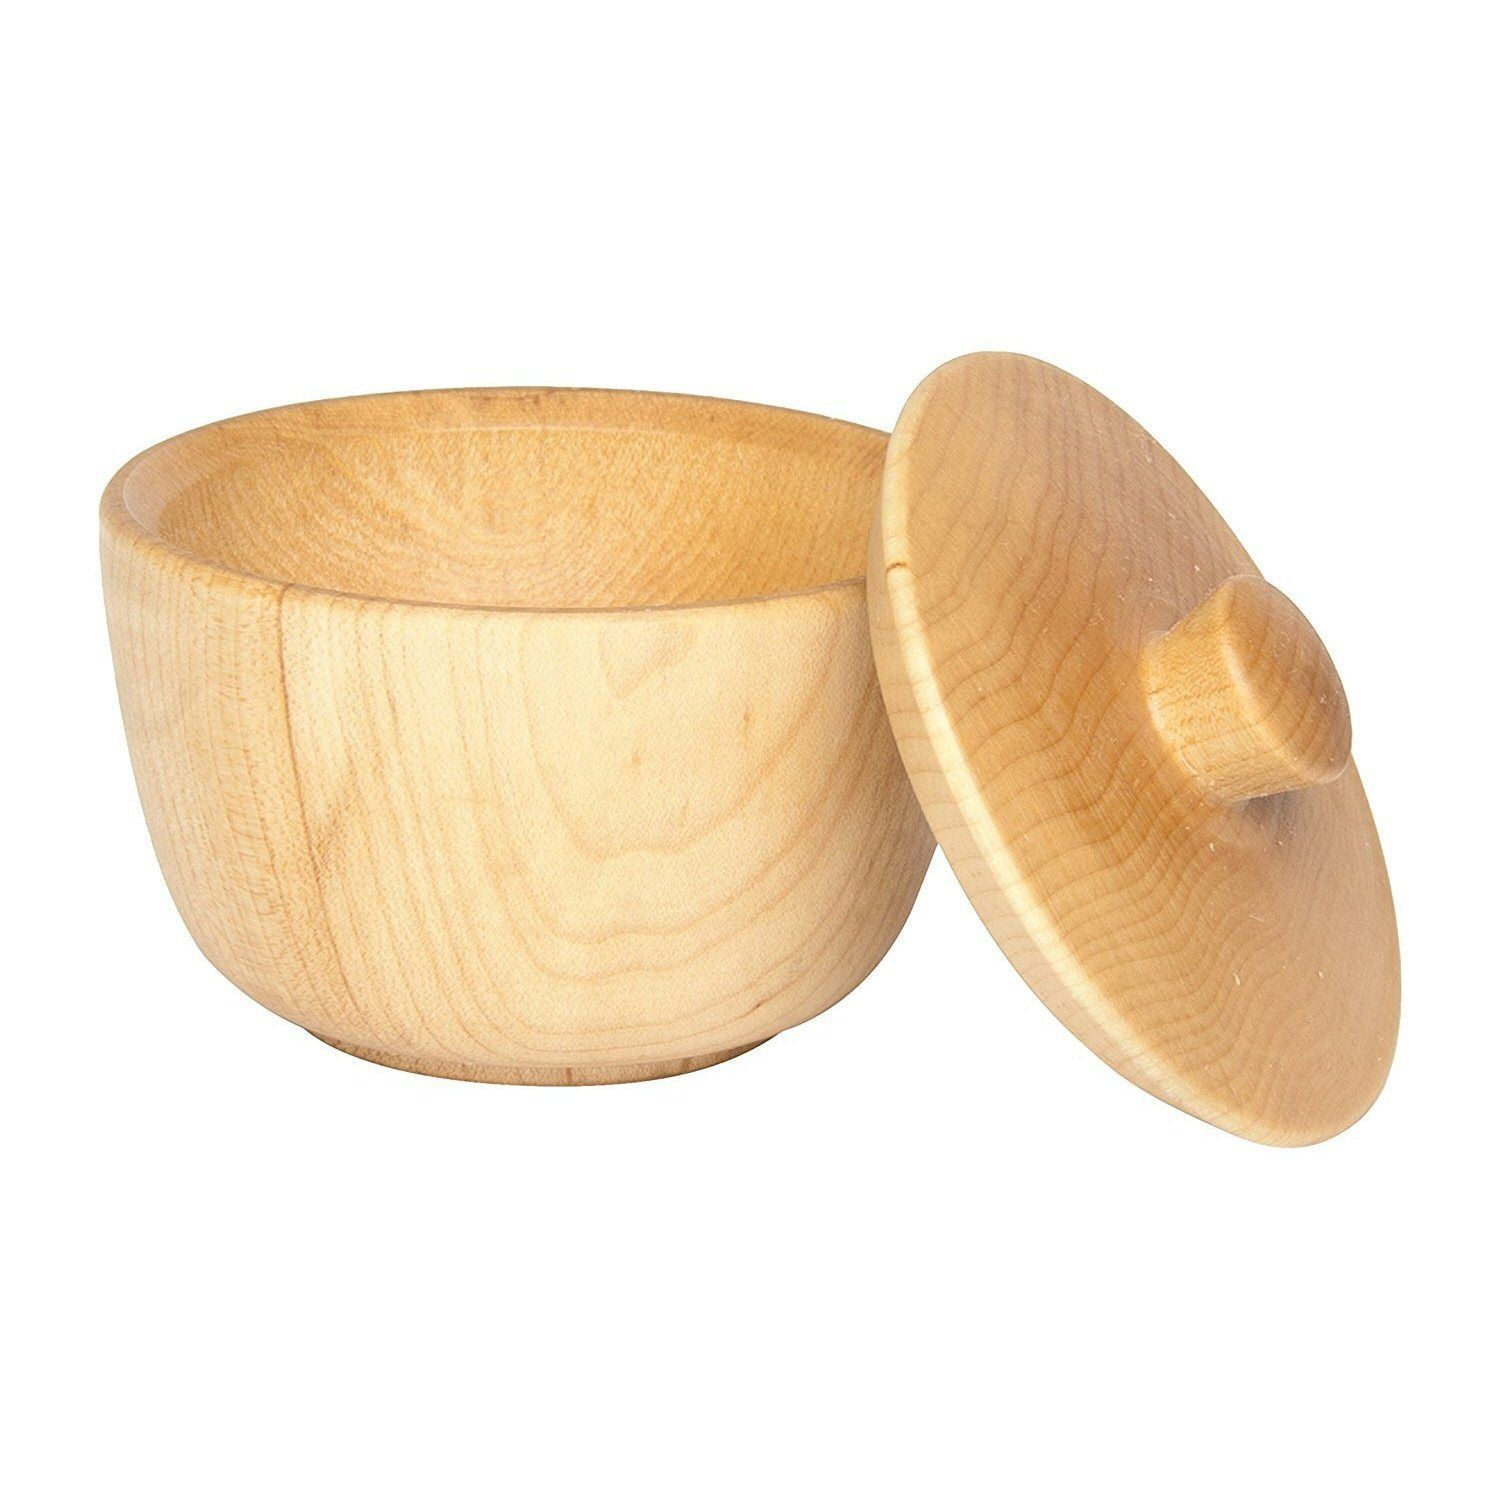 Fletchers' Mill Large Round Wooden Pinch Bowl Set of 2 Condiment Cup 